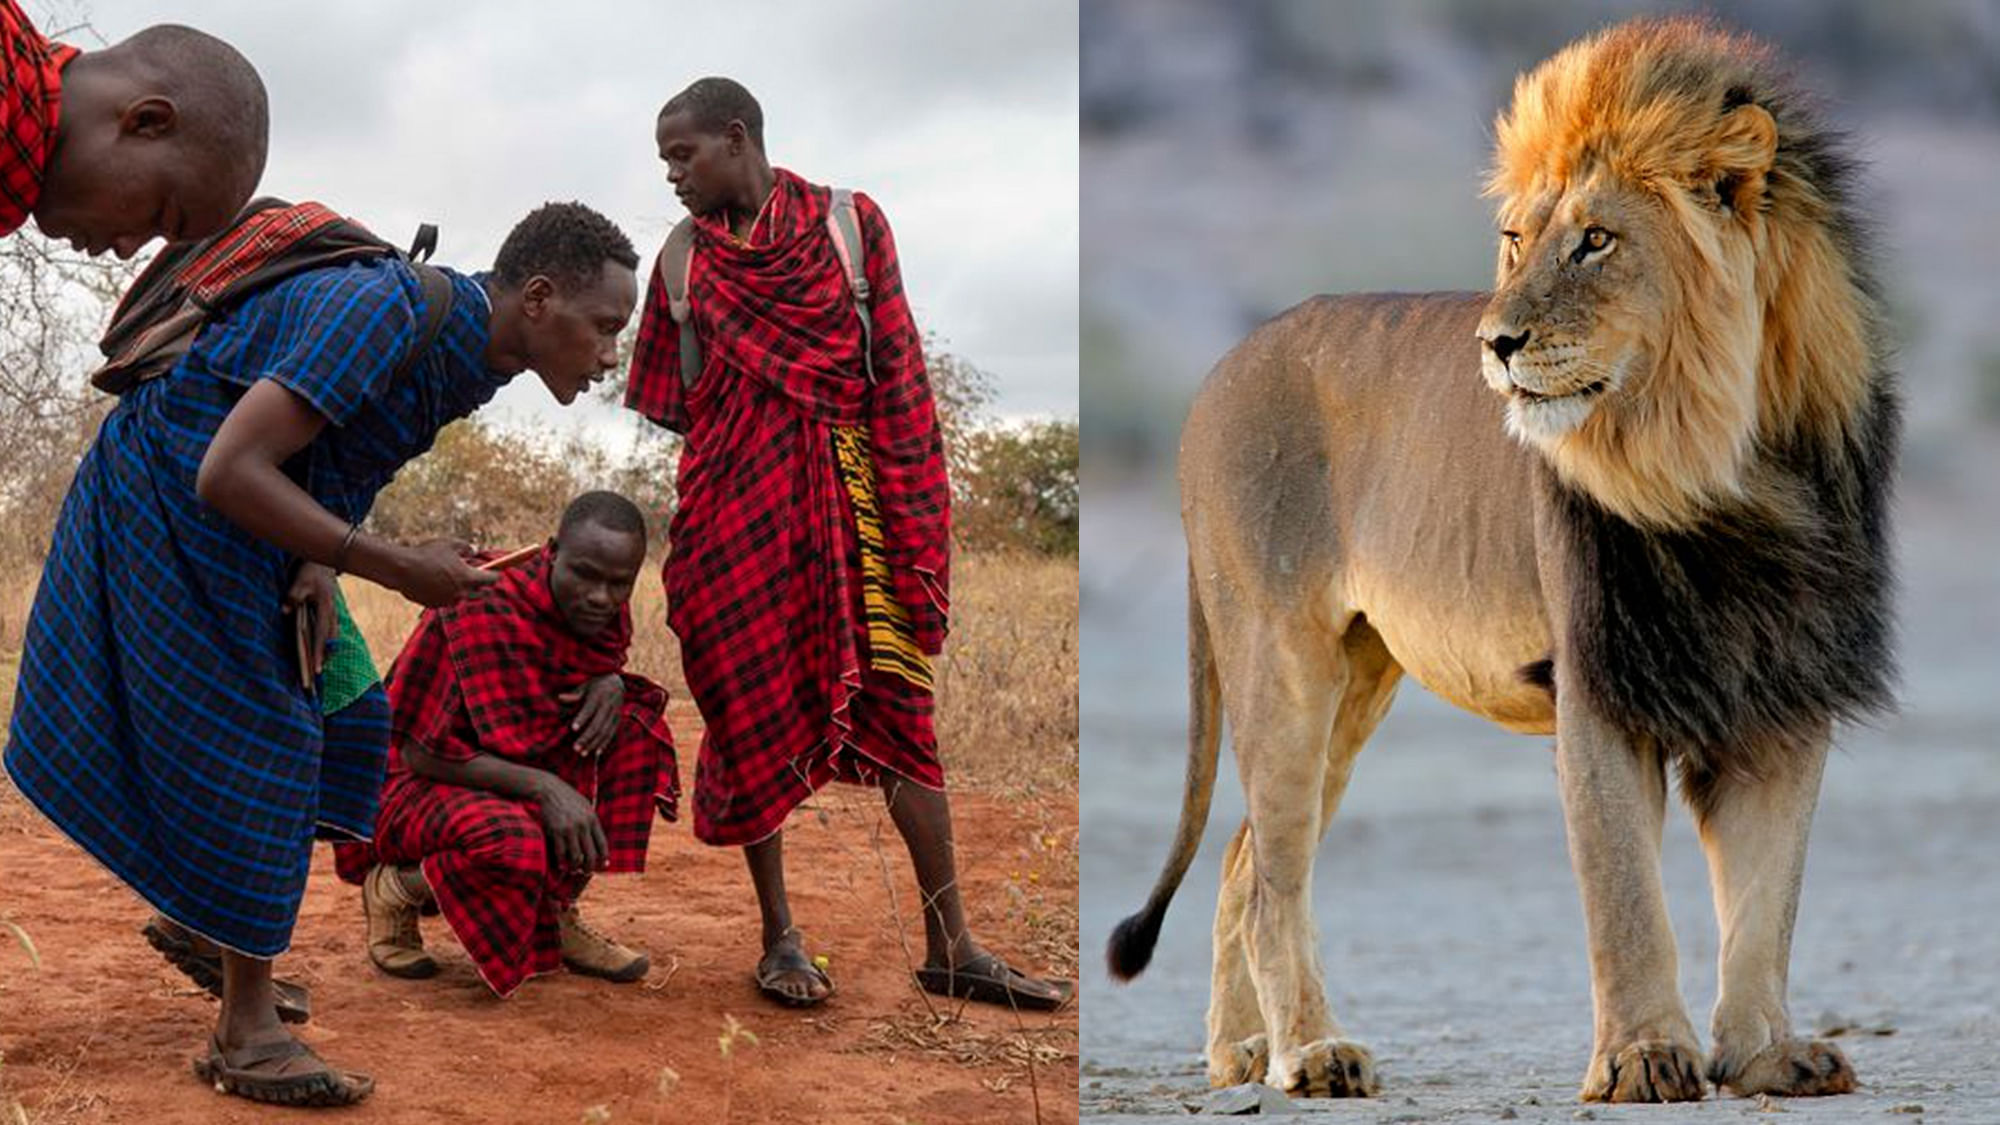 And African lion and people of the Maasai tribe.